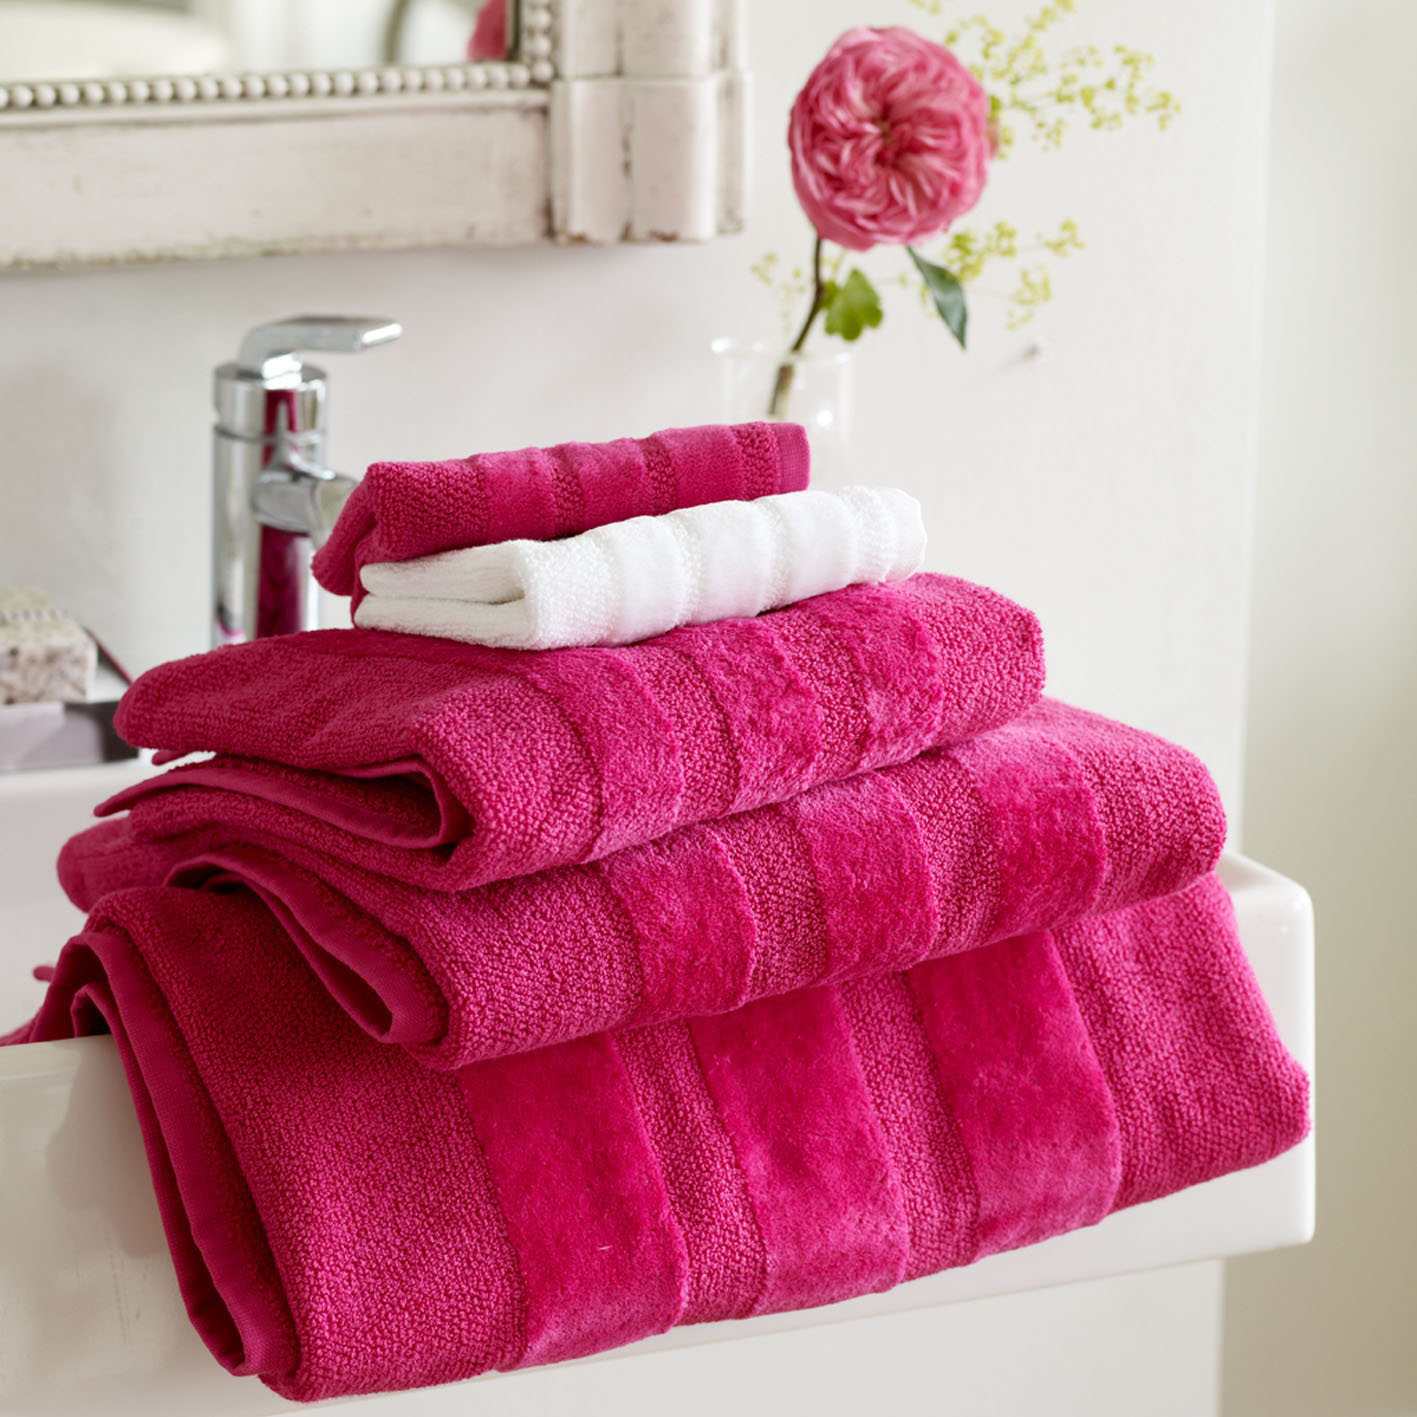 Hard Goods Towels and Robes Buying Agency in Noida